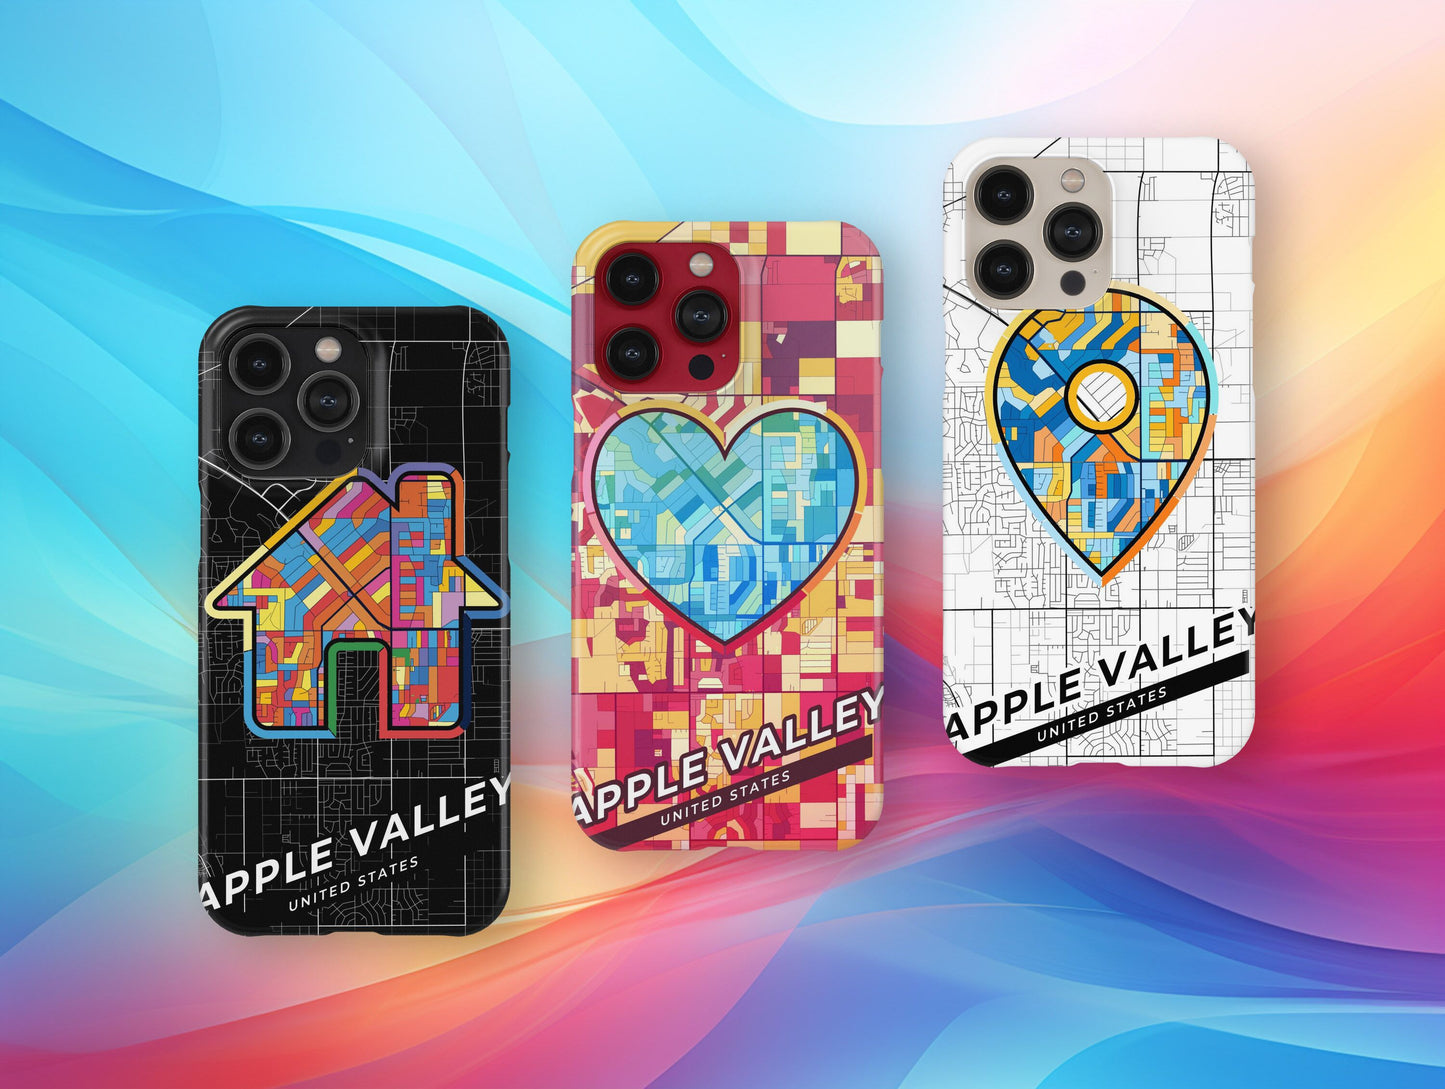 Apple Valley California slim phone case with colorful icon. Birthday, wedding or housewarming gift. Couple match cases.